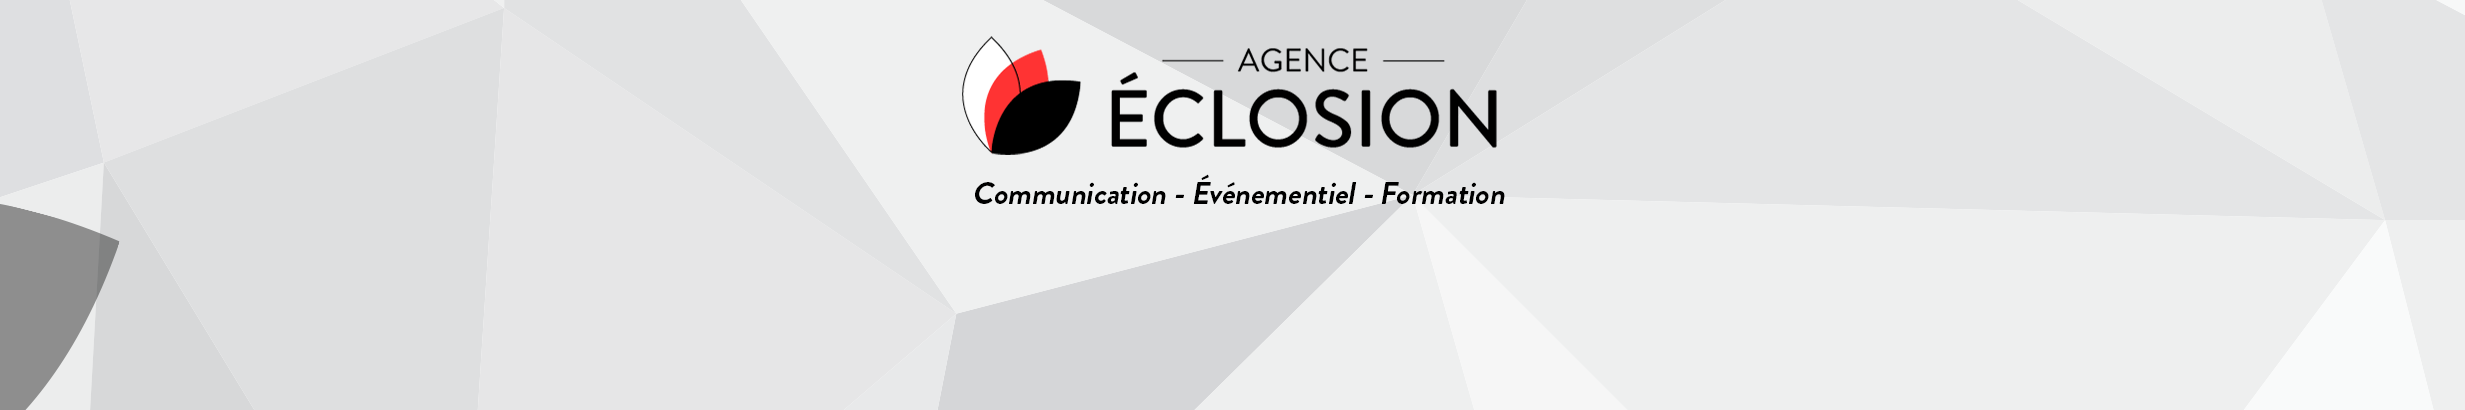 Agence Eclosion's profile banner